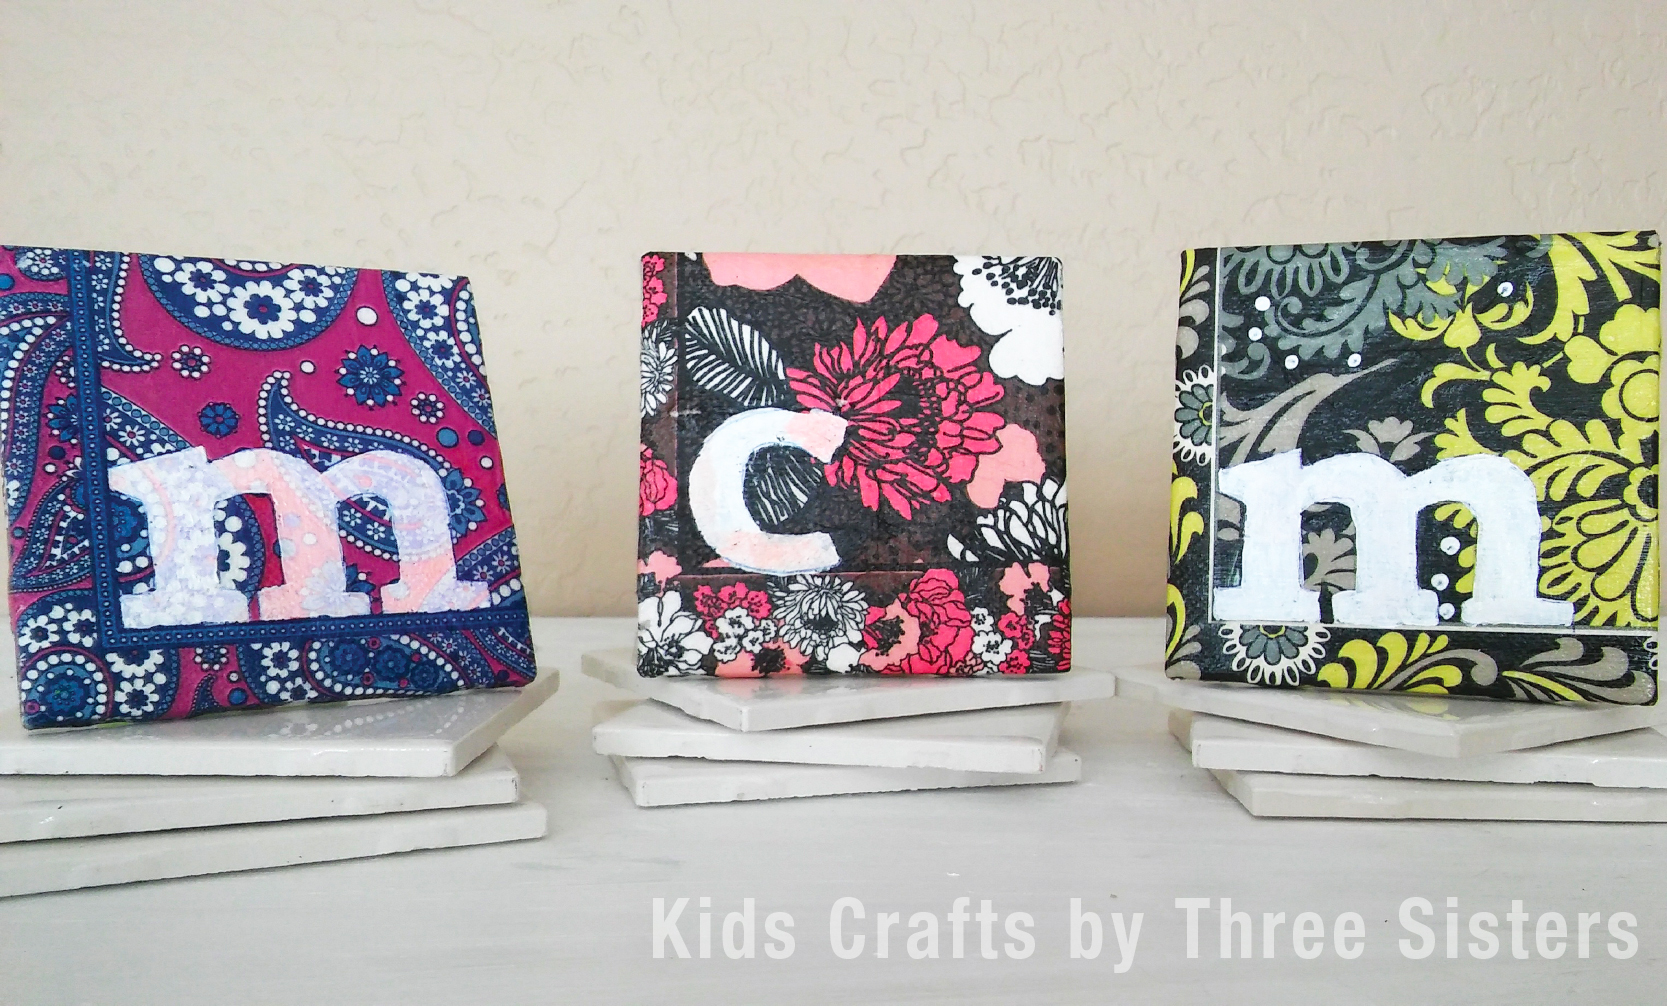 How to Make Ceramic Tile Coasters - Kids Crafts by Three Sisters, Free  Craft TutorialsKids Crafts by Three Sisters